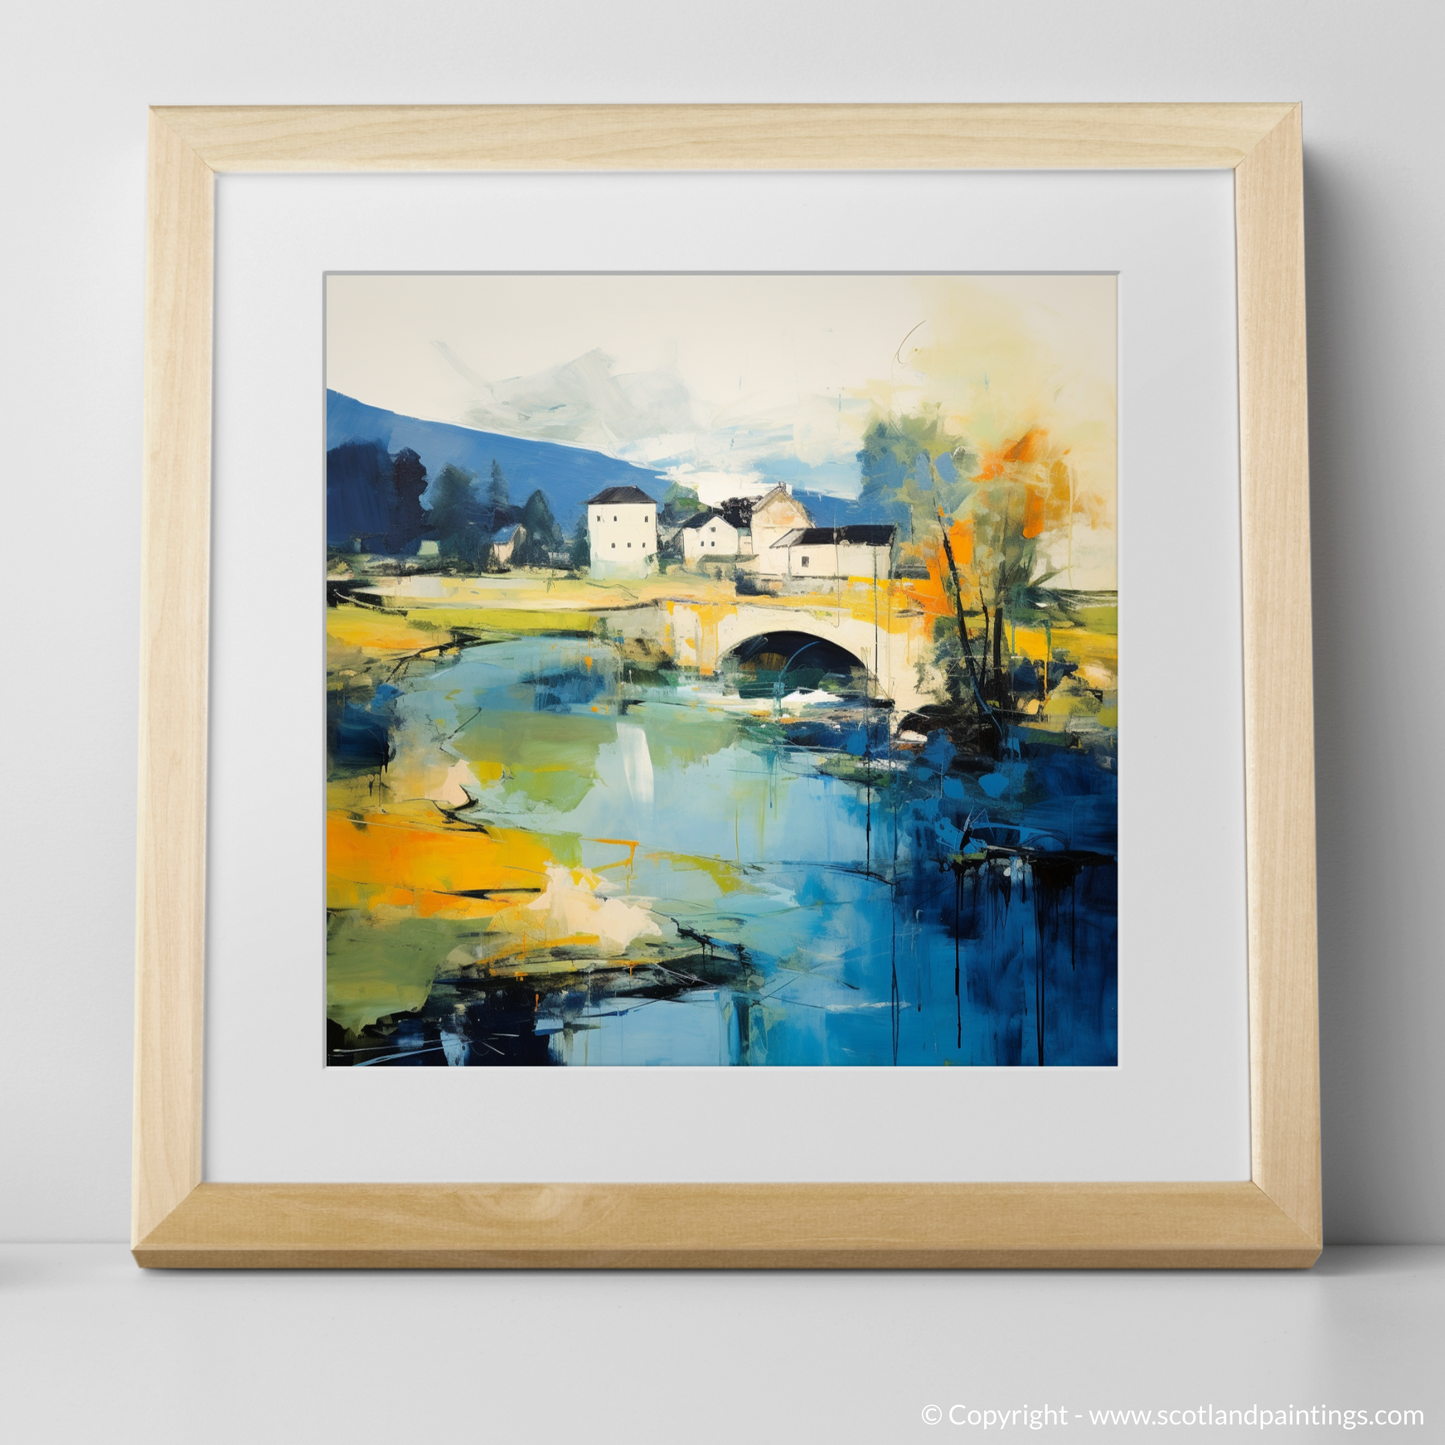 Art Print of River Almond, Edinburgh in summer with a natural frame